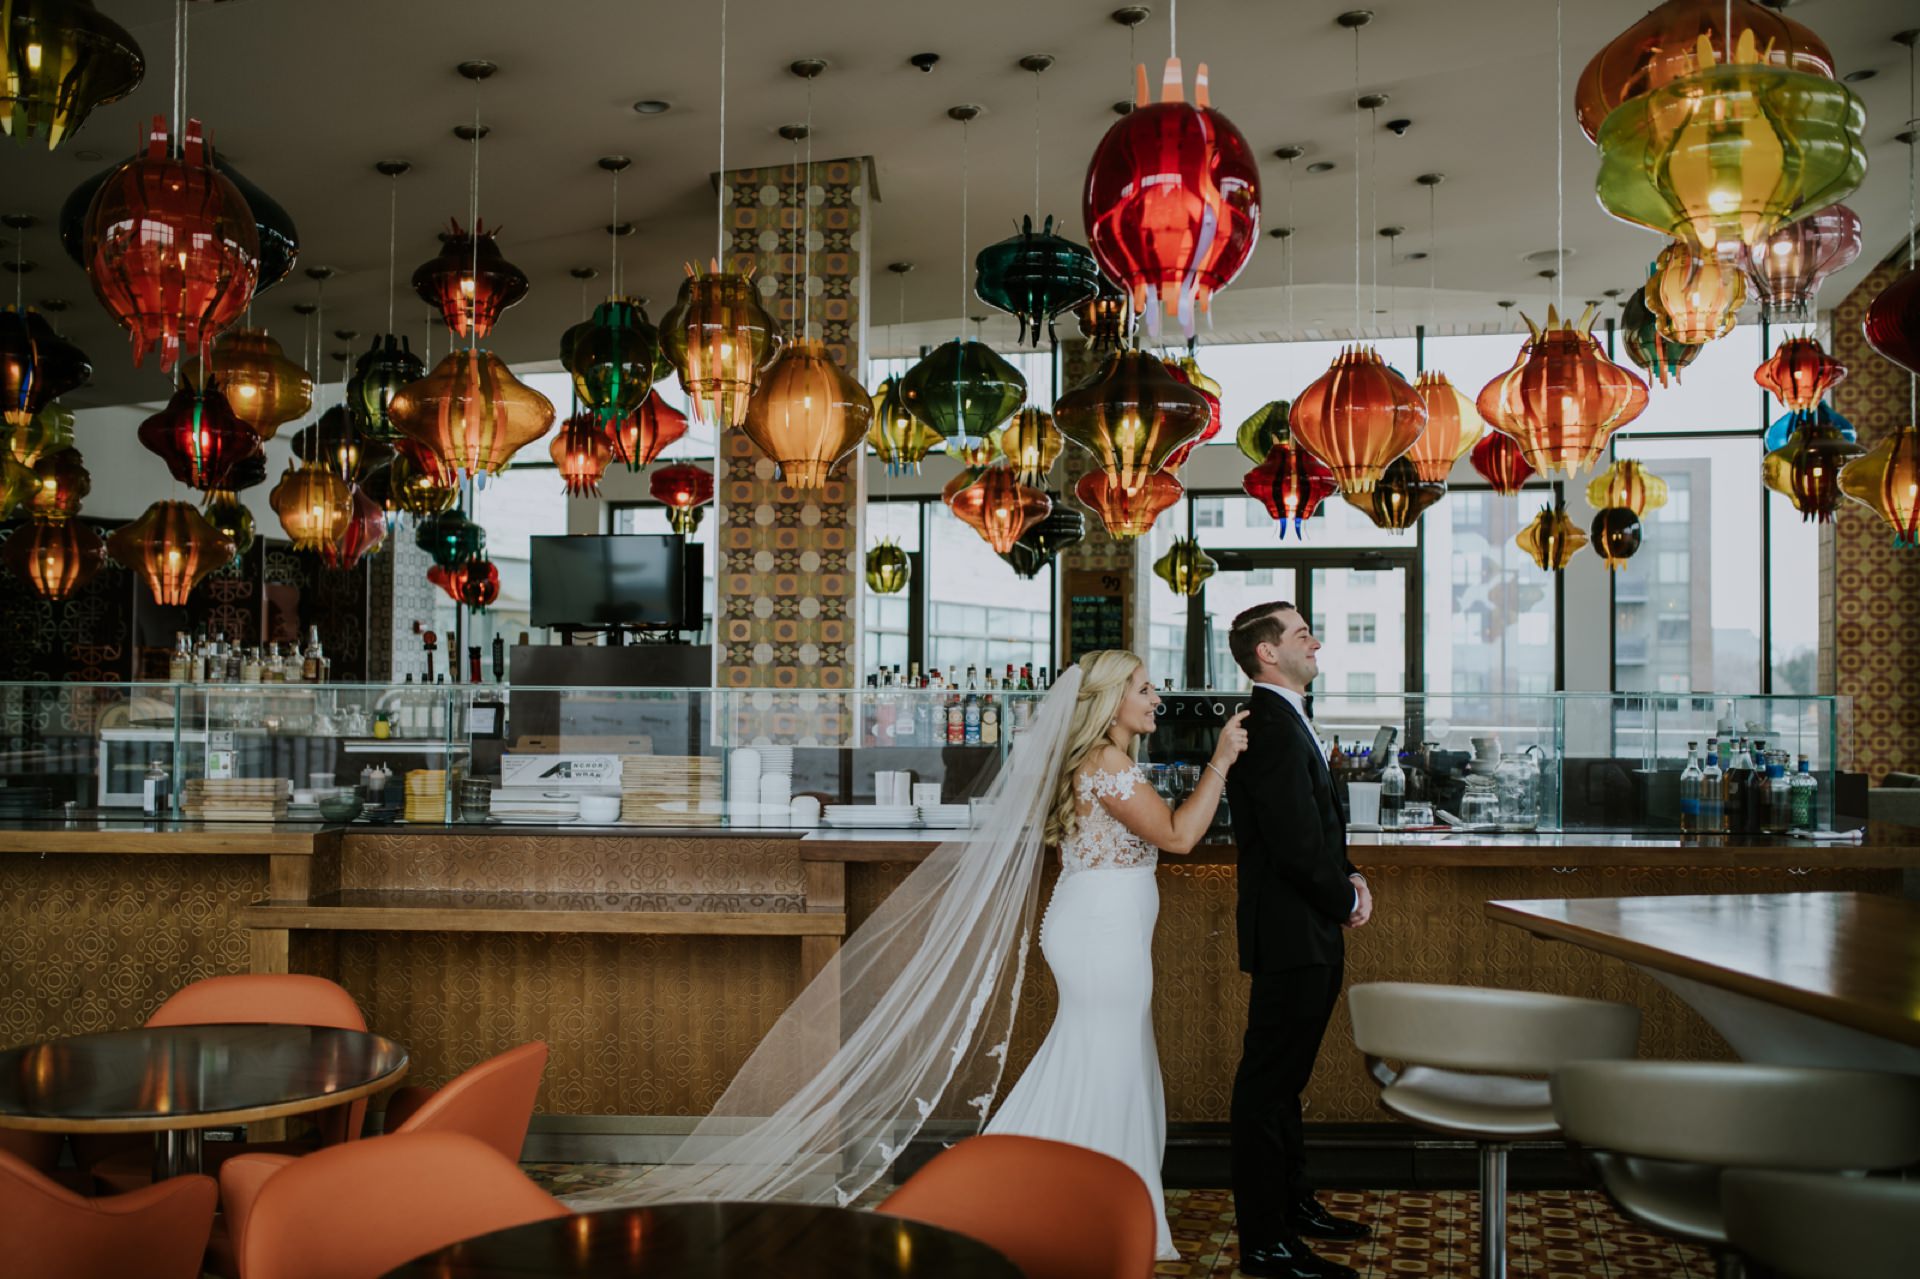 a bride in a white dress taps a groom in a suit on the shoulder under a bunch of hanging glass lamps in a bar in this mavris wedding photography